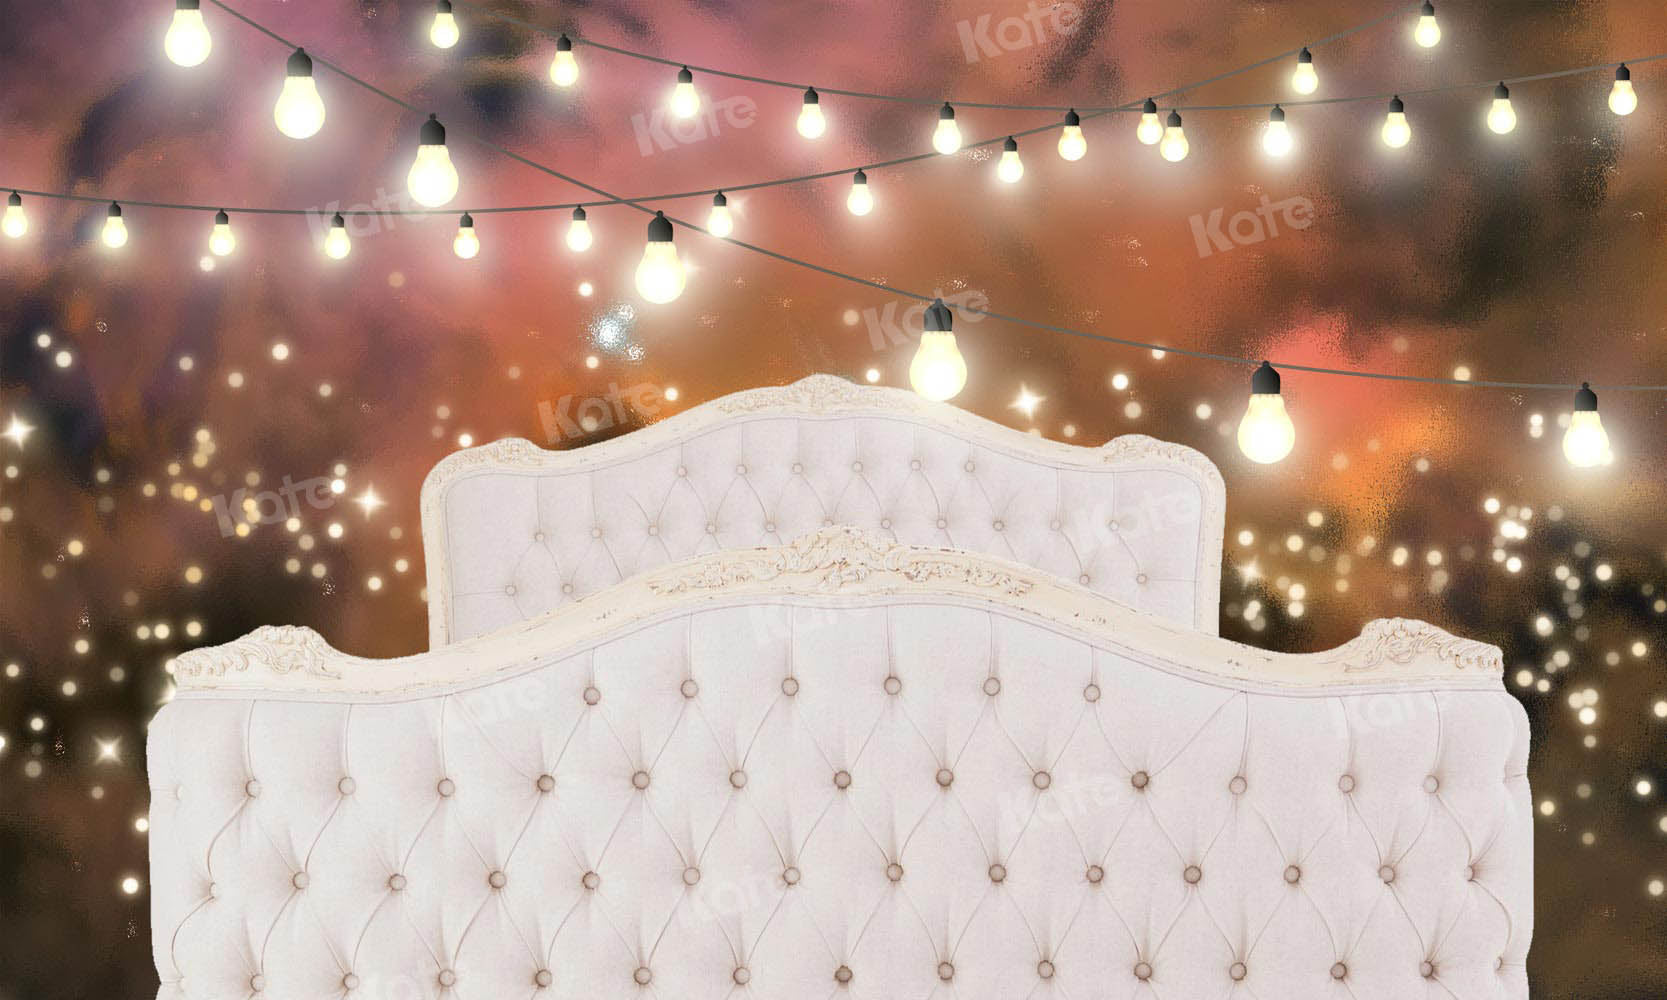 Kate Headboard Starry Sky Lights Background for Photography Designed by Chain Photography